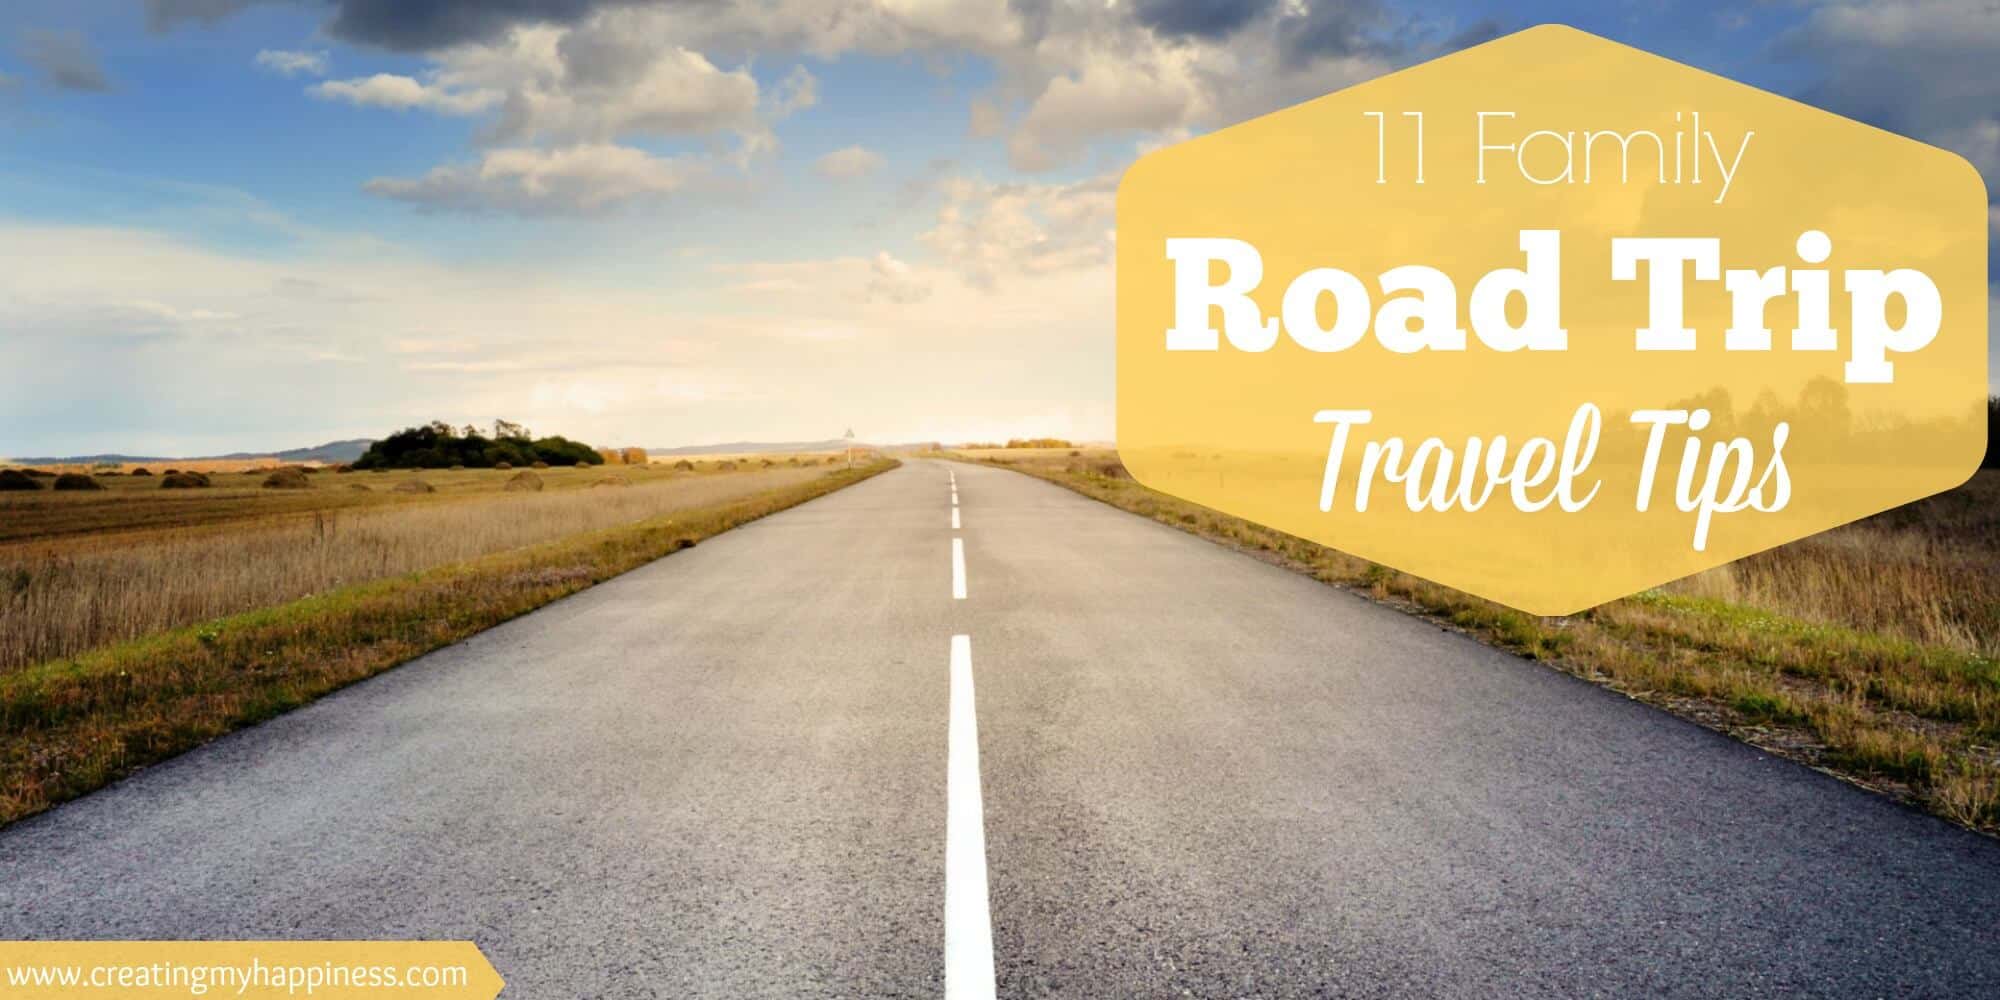 Hitting the road for a family vacation? Follow these simple tips to have a safe, fun road trip.